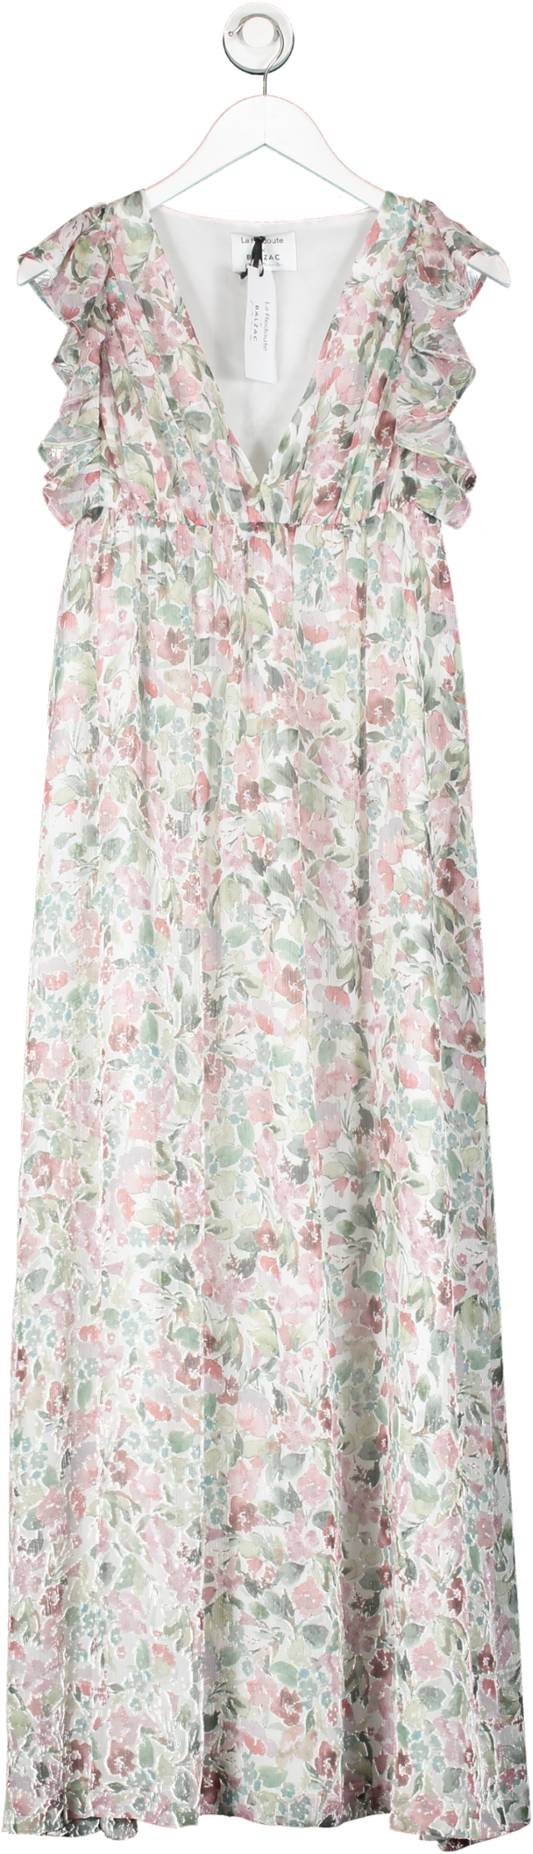 La Redoute Multicoloured Floral Print Sleeveless Maxi Dress With Plunge Neck And Ruffles UK M